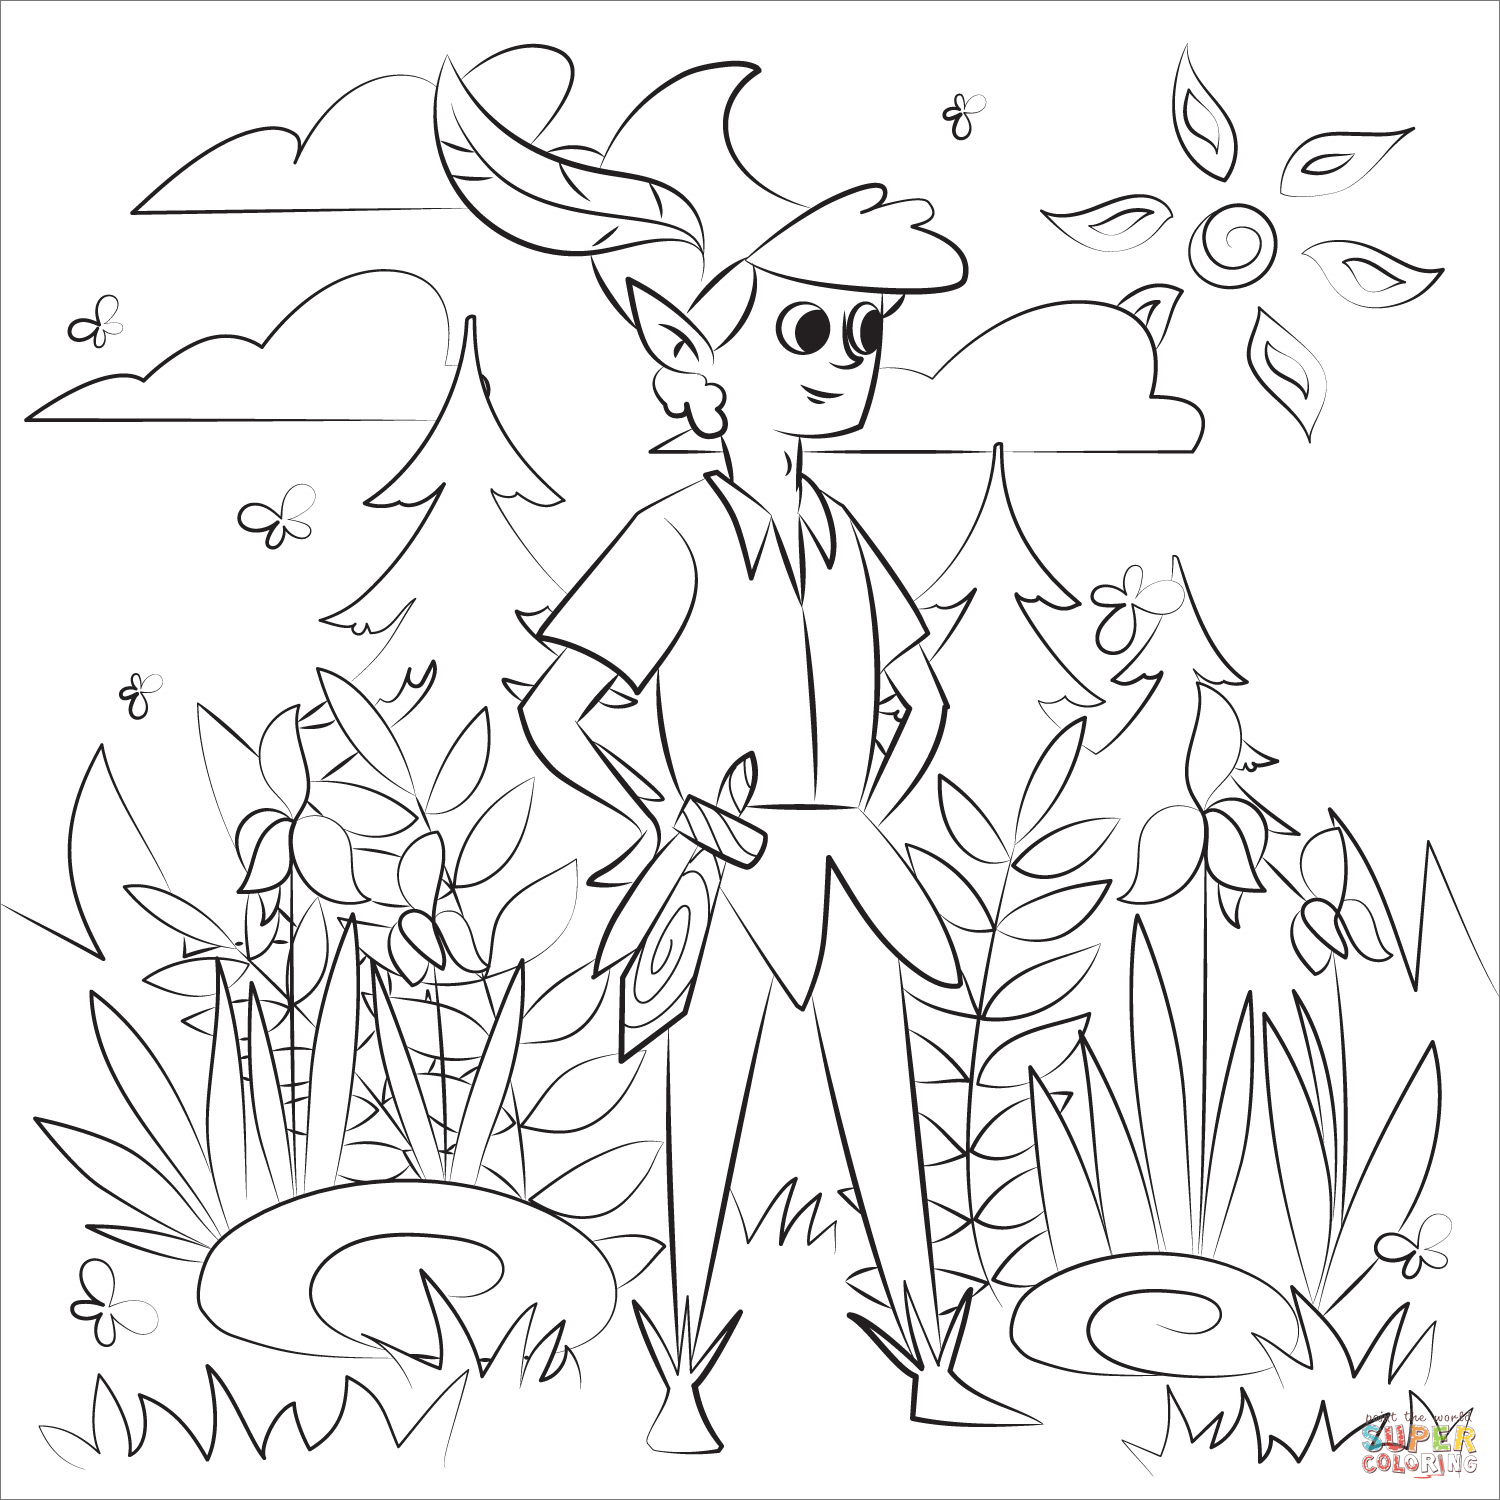 Peter pan coloring page free printable coloring pages